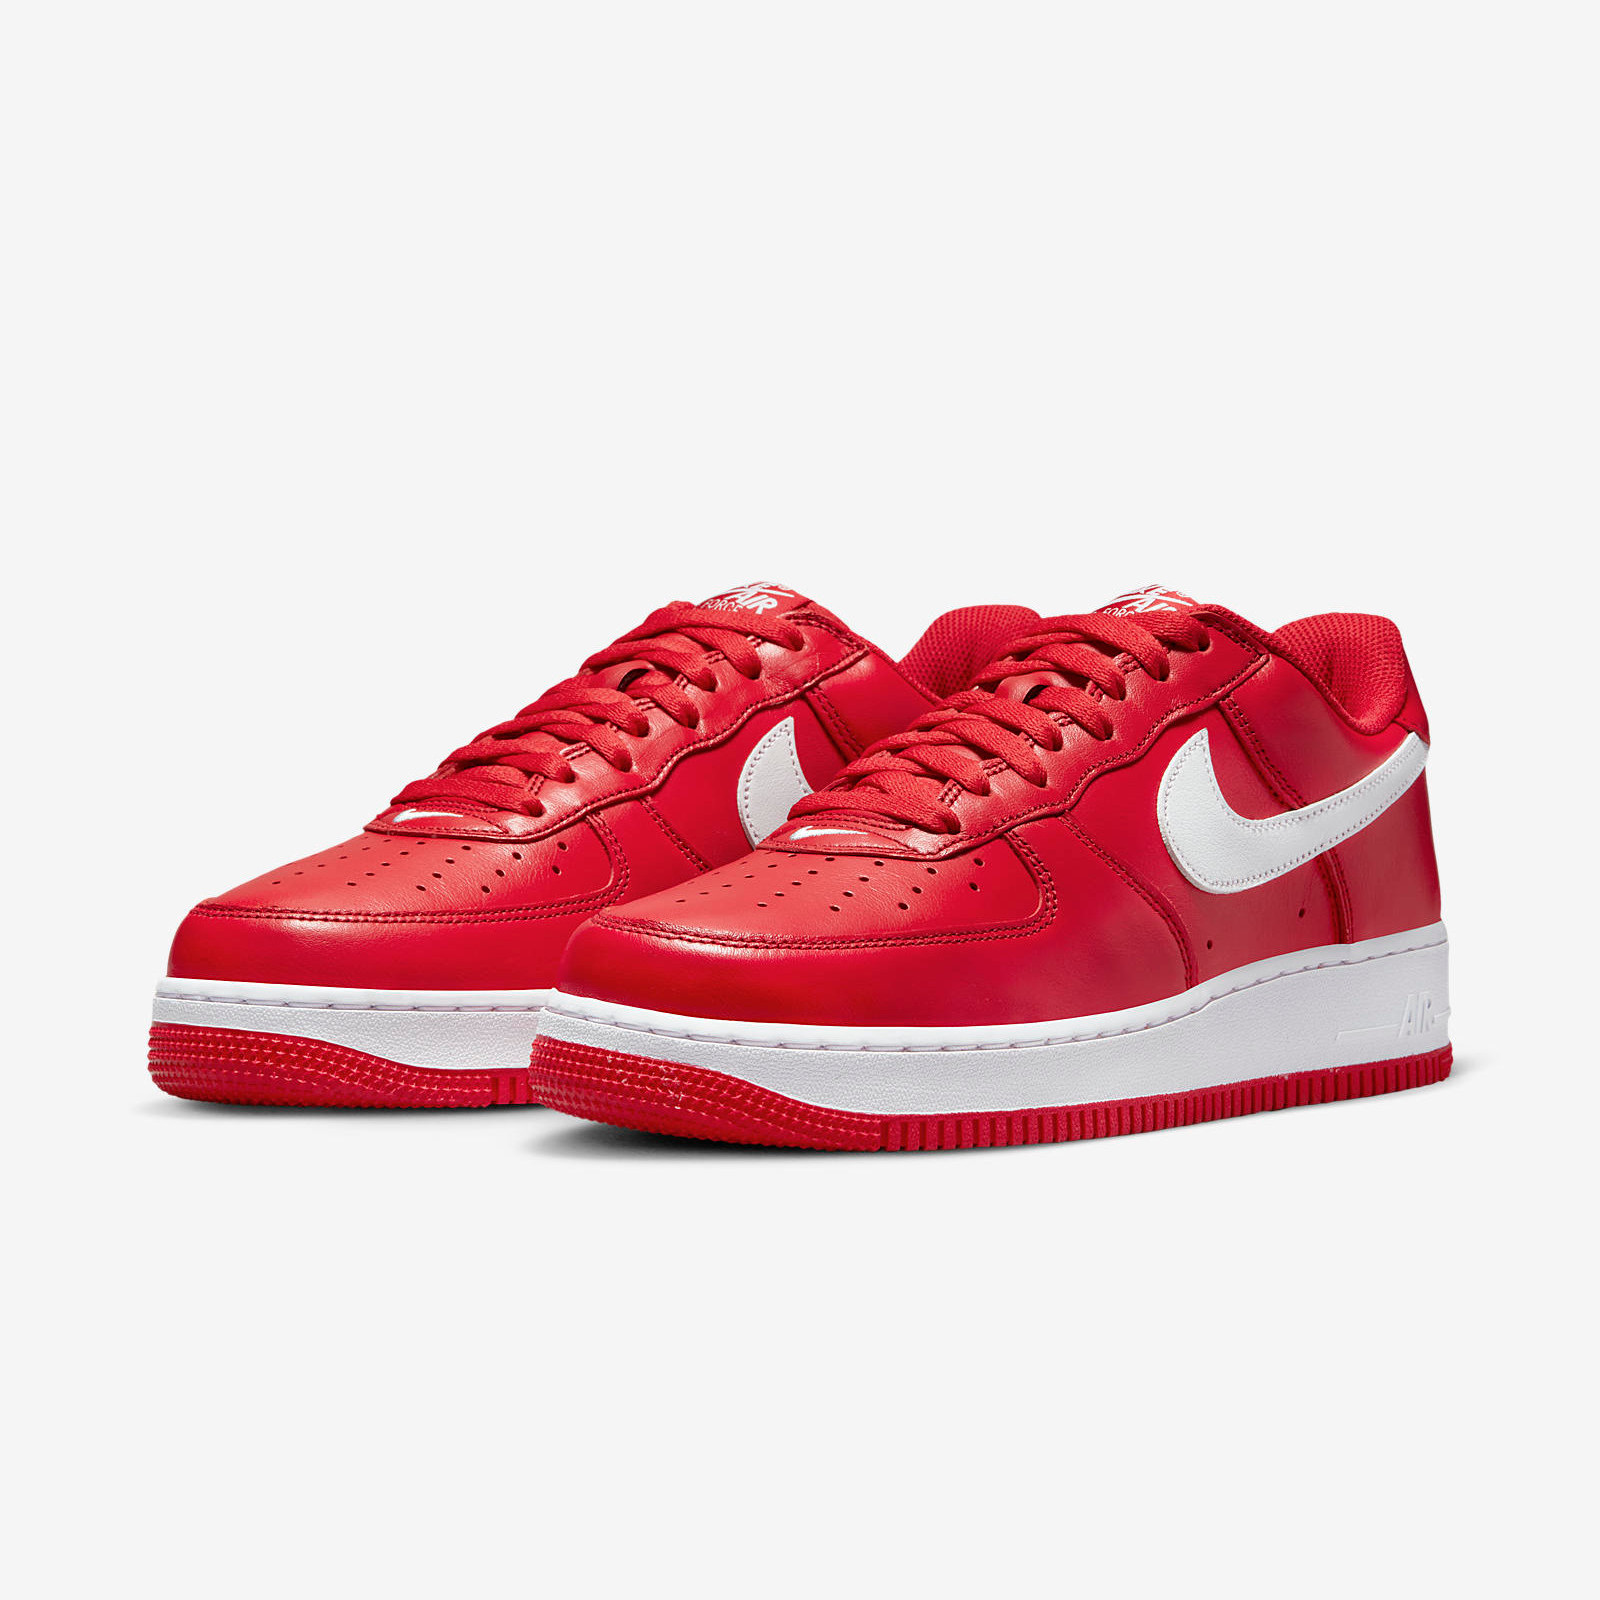 Nike Air Force 1
« University Red »